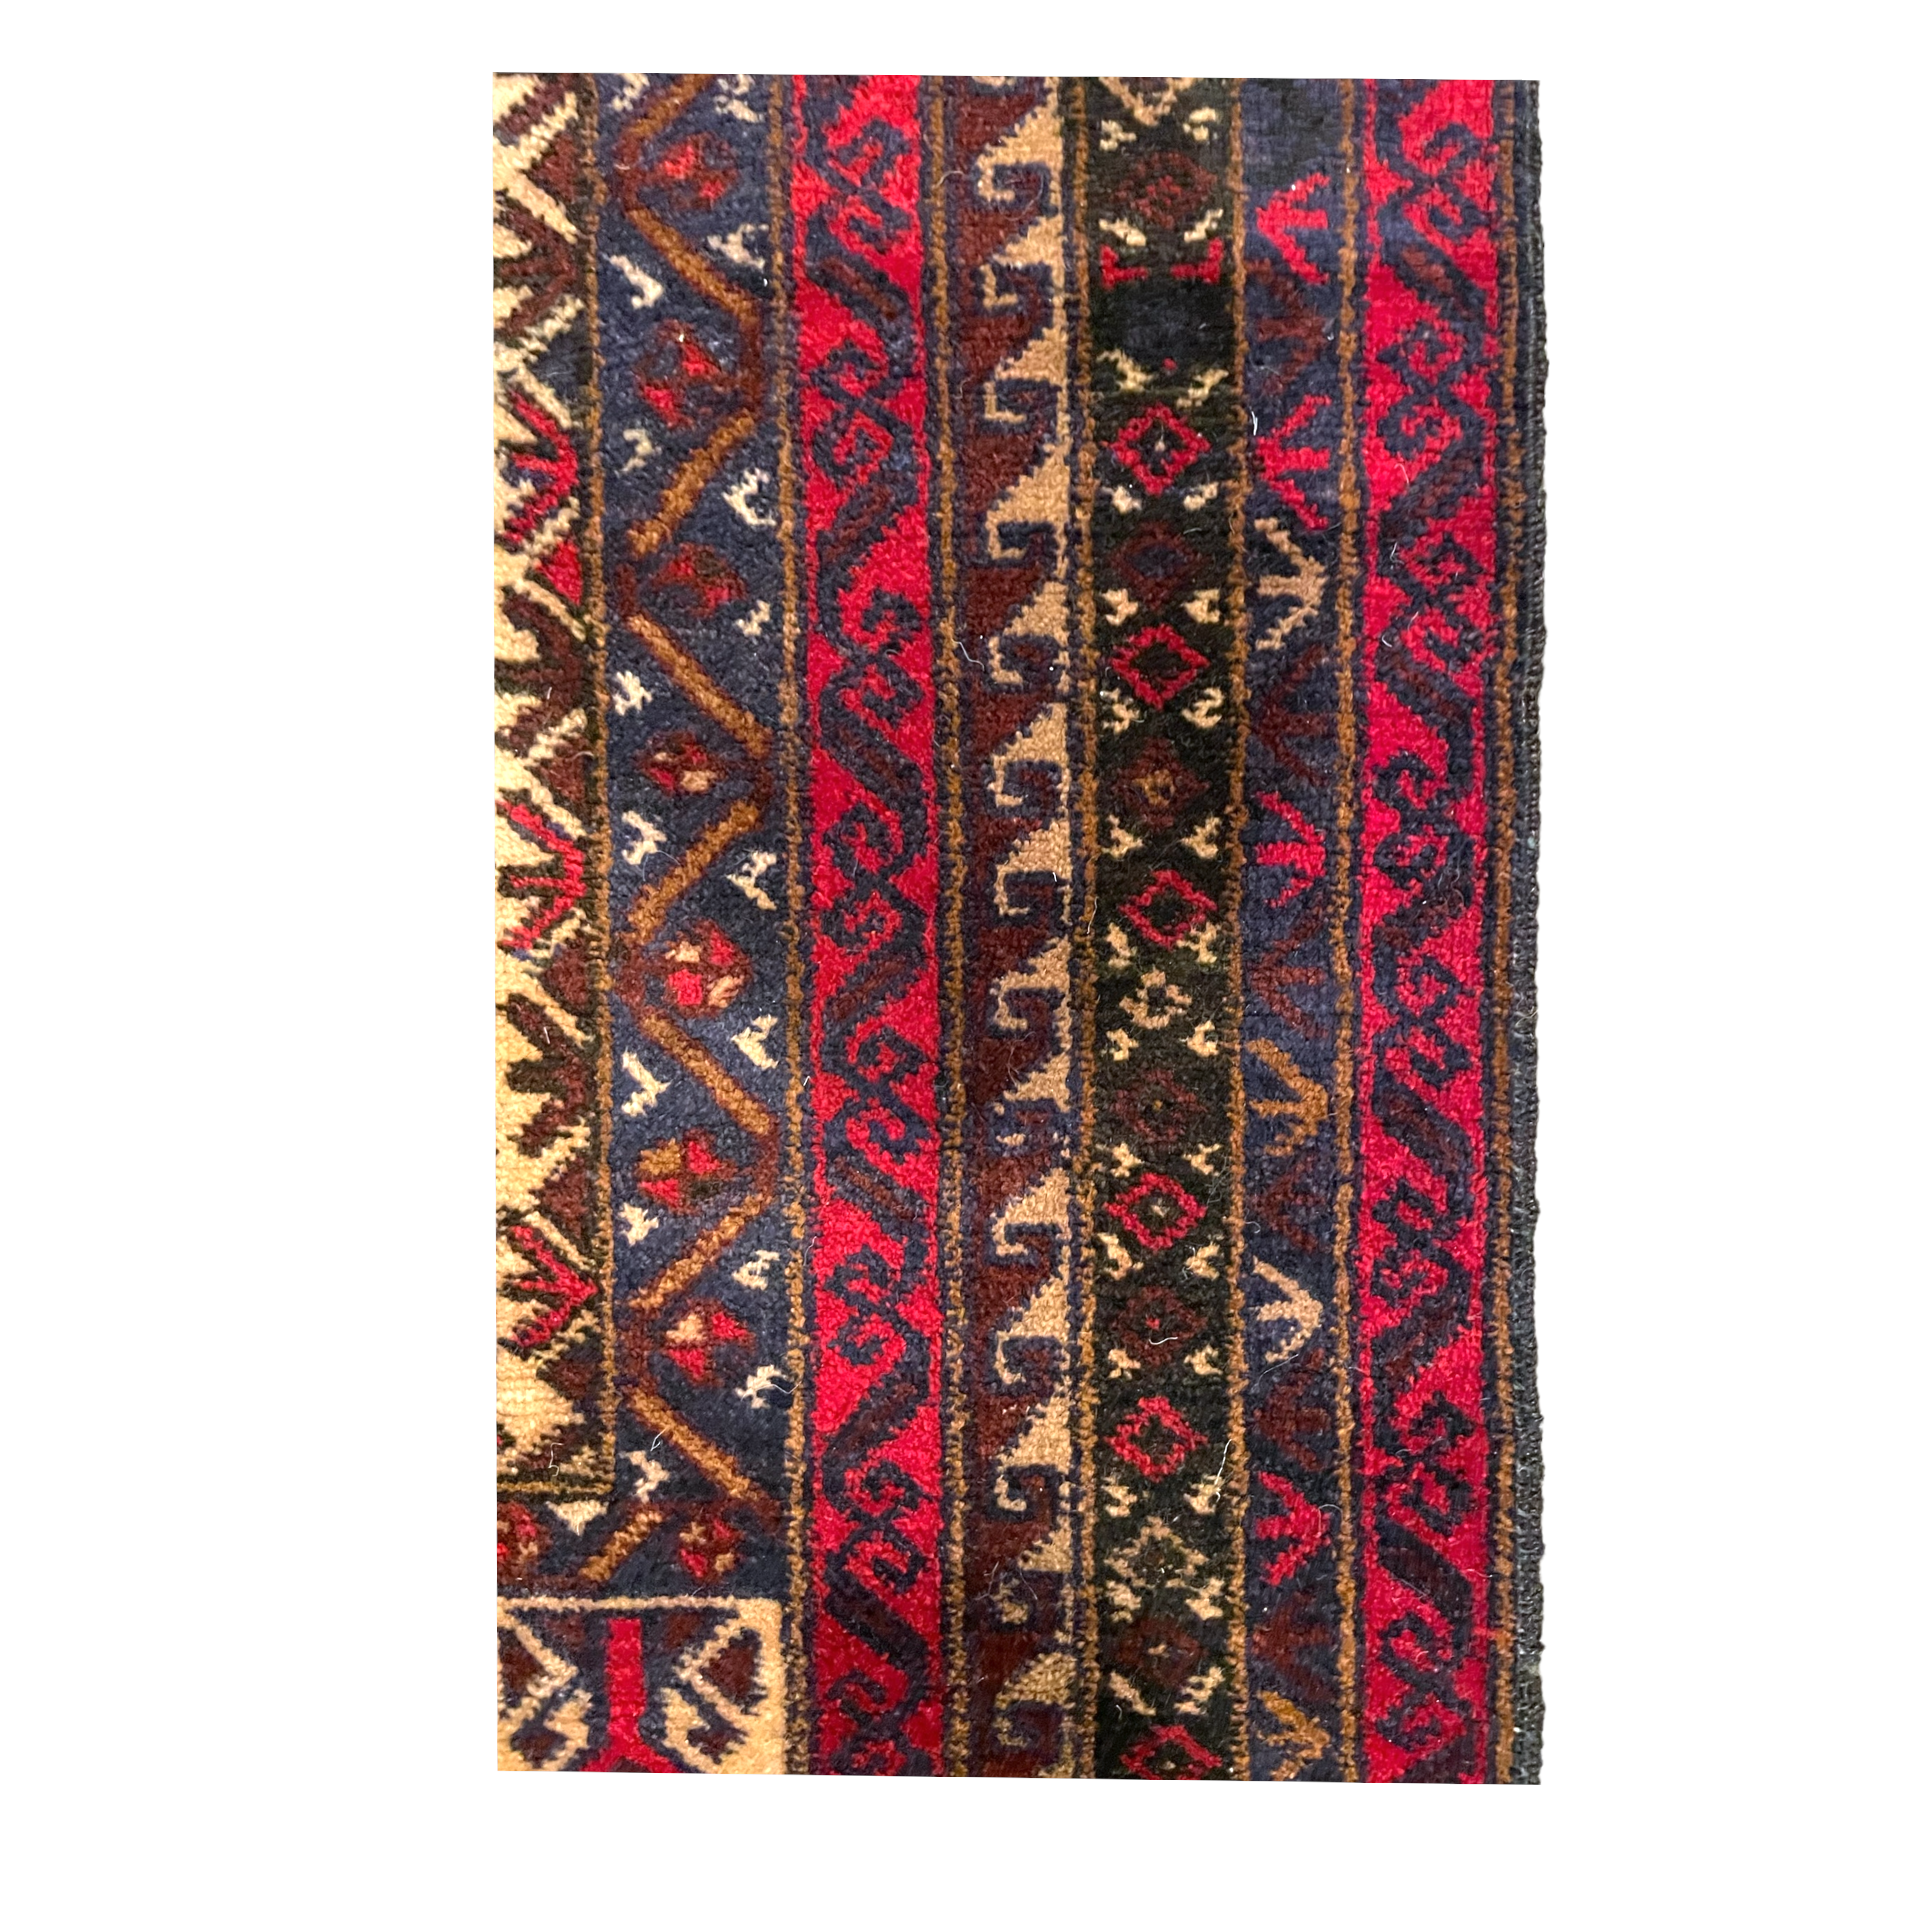 The Yaqin rug is a traditional, one-of-a-kind handwoven Afghan Baluch rug.   